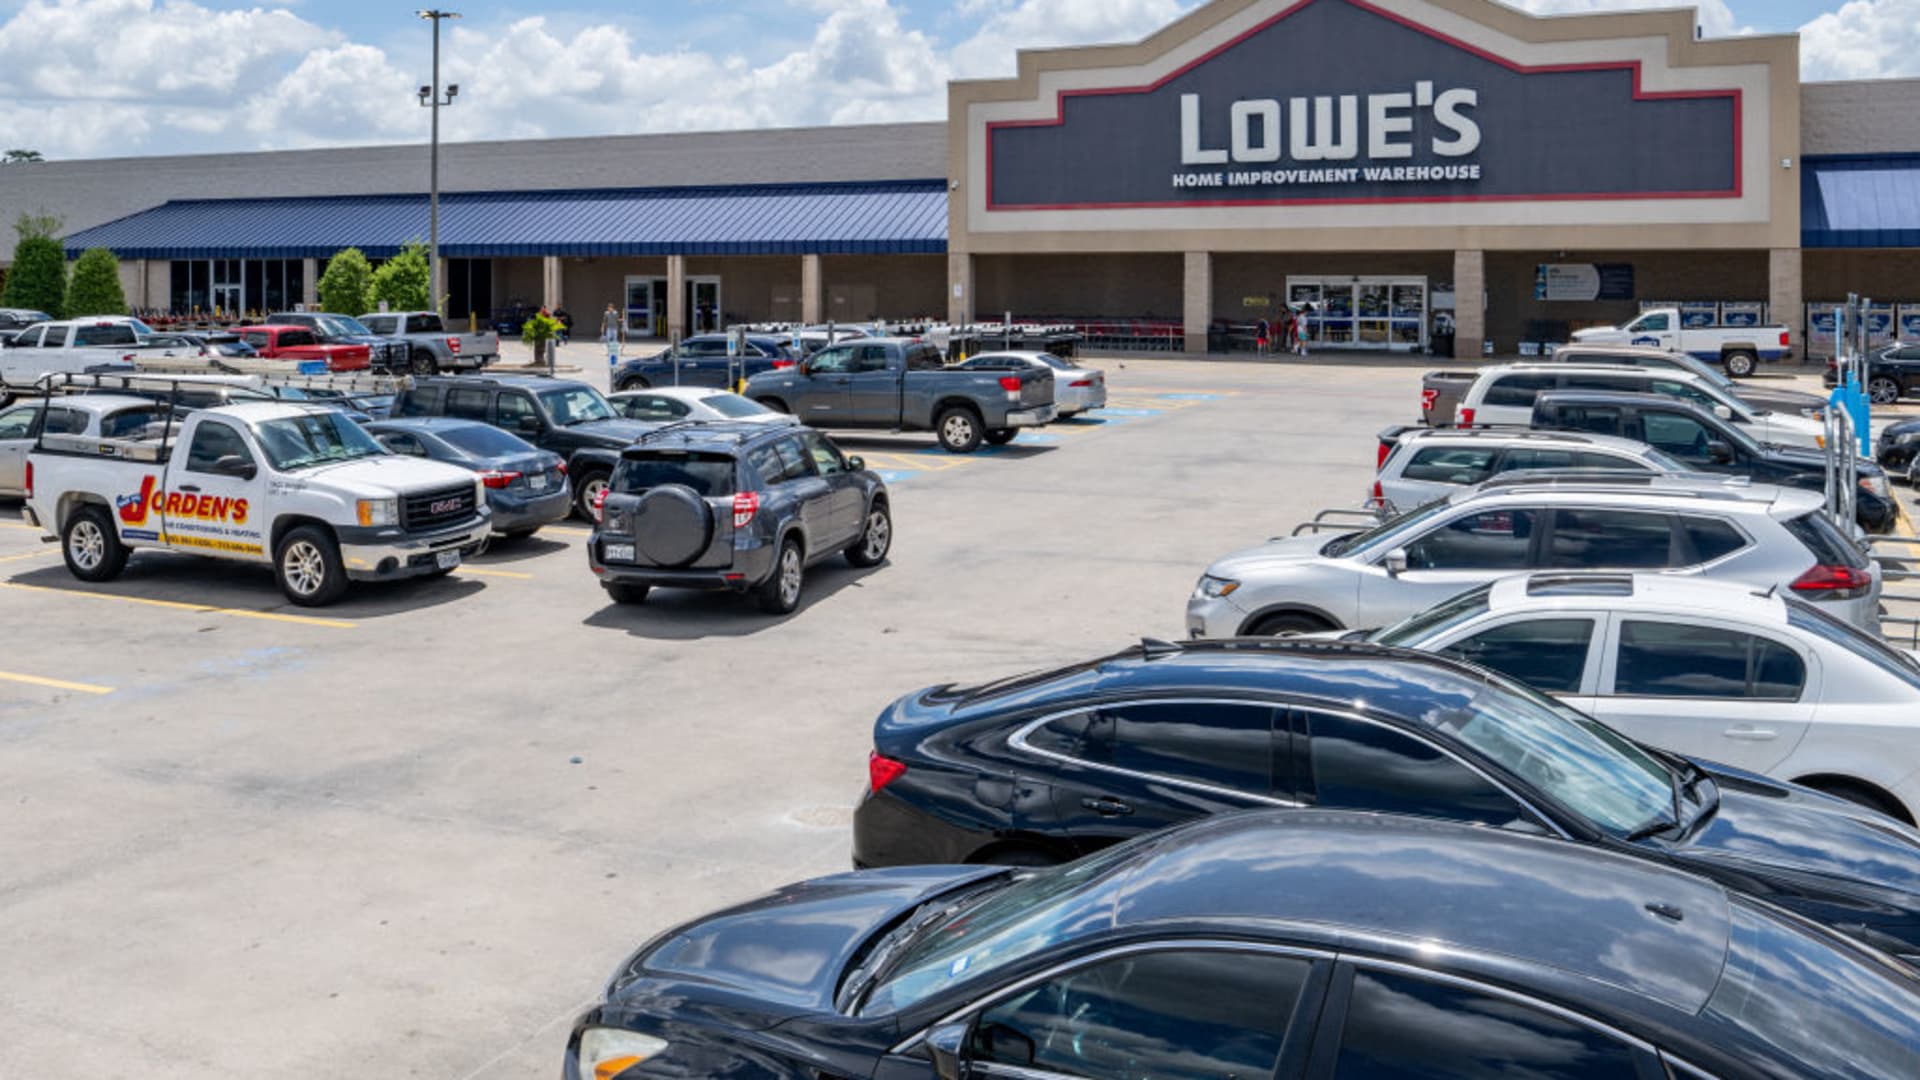 A Lowe's Home Improvement Warehouse store is seen on August 17, 2022 in Houston, Texas. 